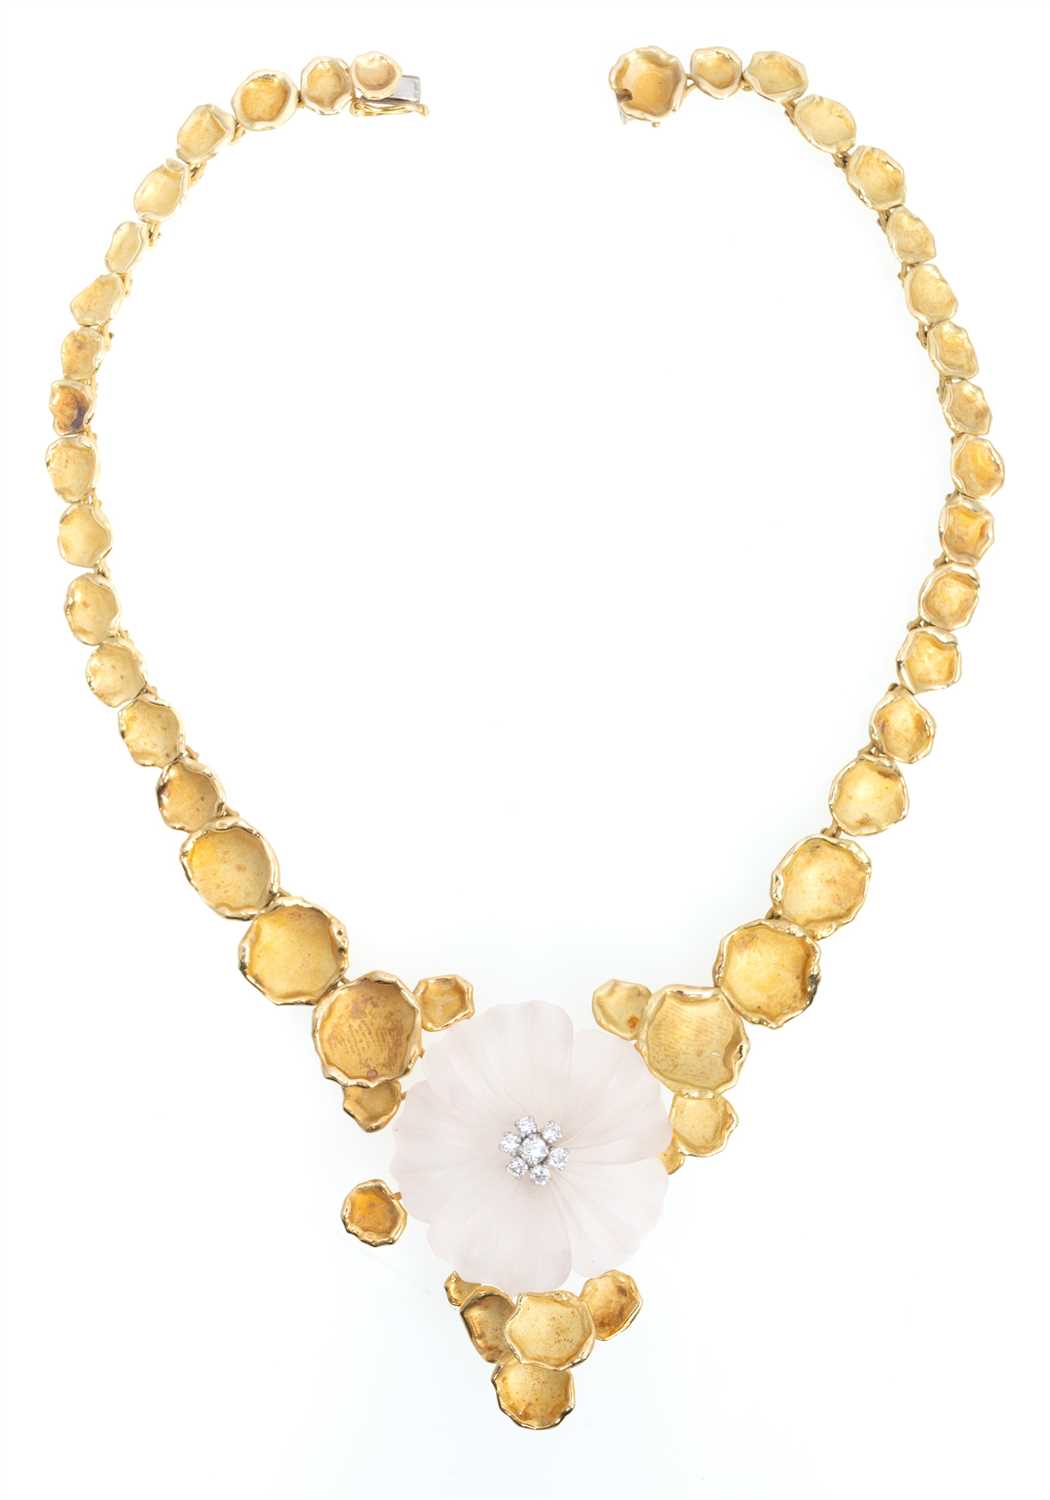 Lot 234 A 1970 S 18 Carat Gold Necklace With Diamond